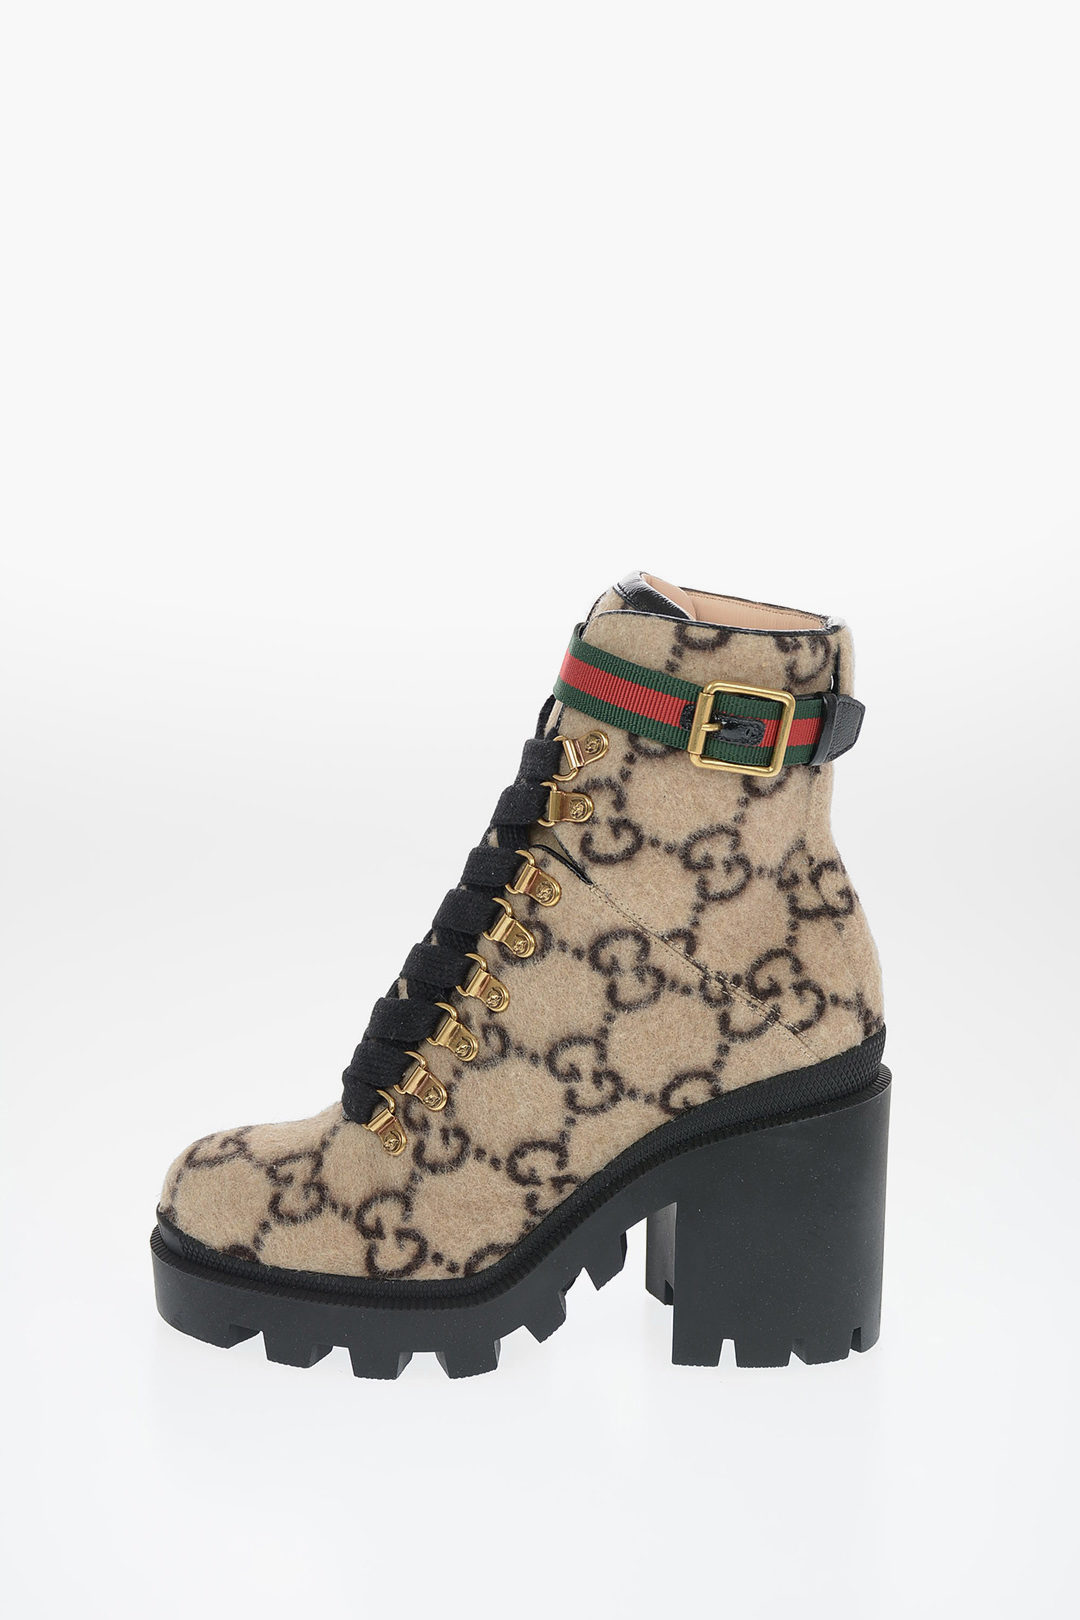 Gucci 9 cm wool High heel ankle boots women - Glamood Outlet